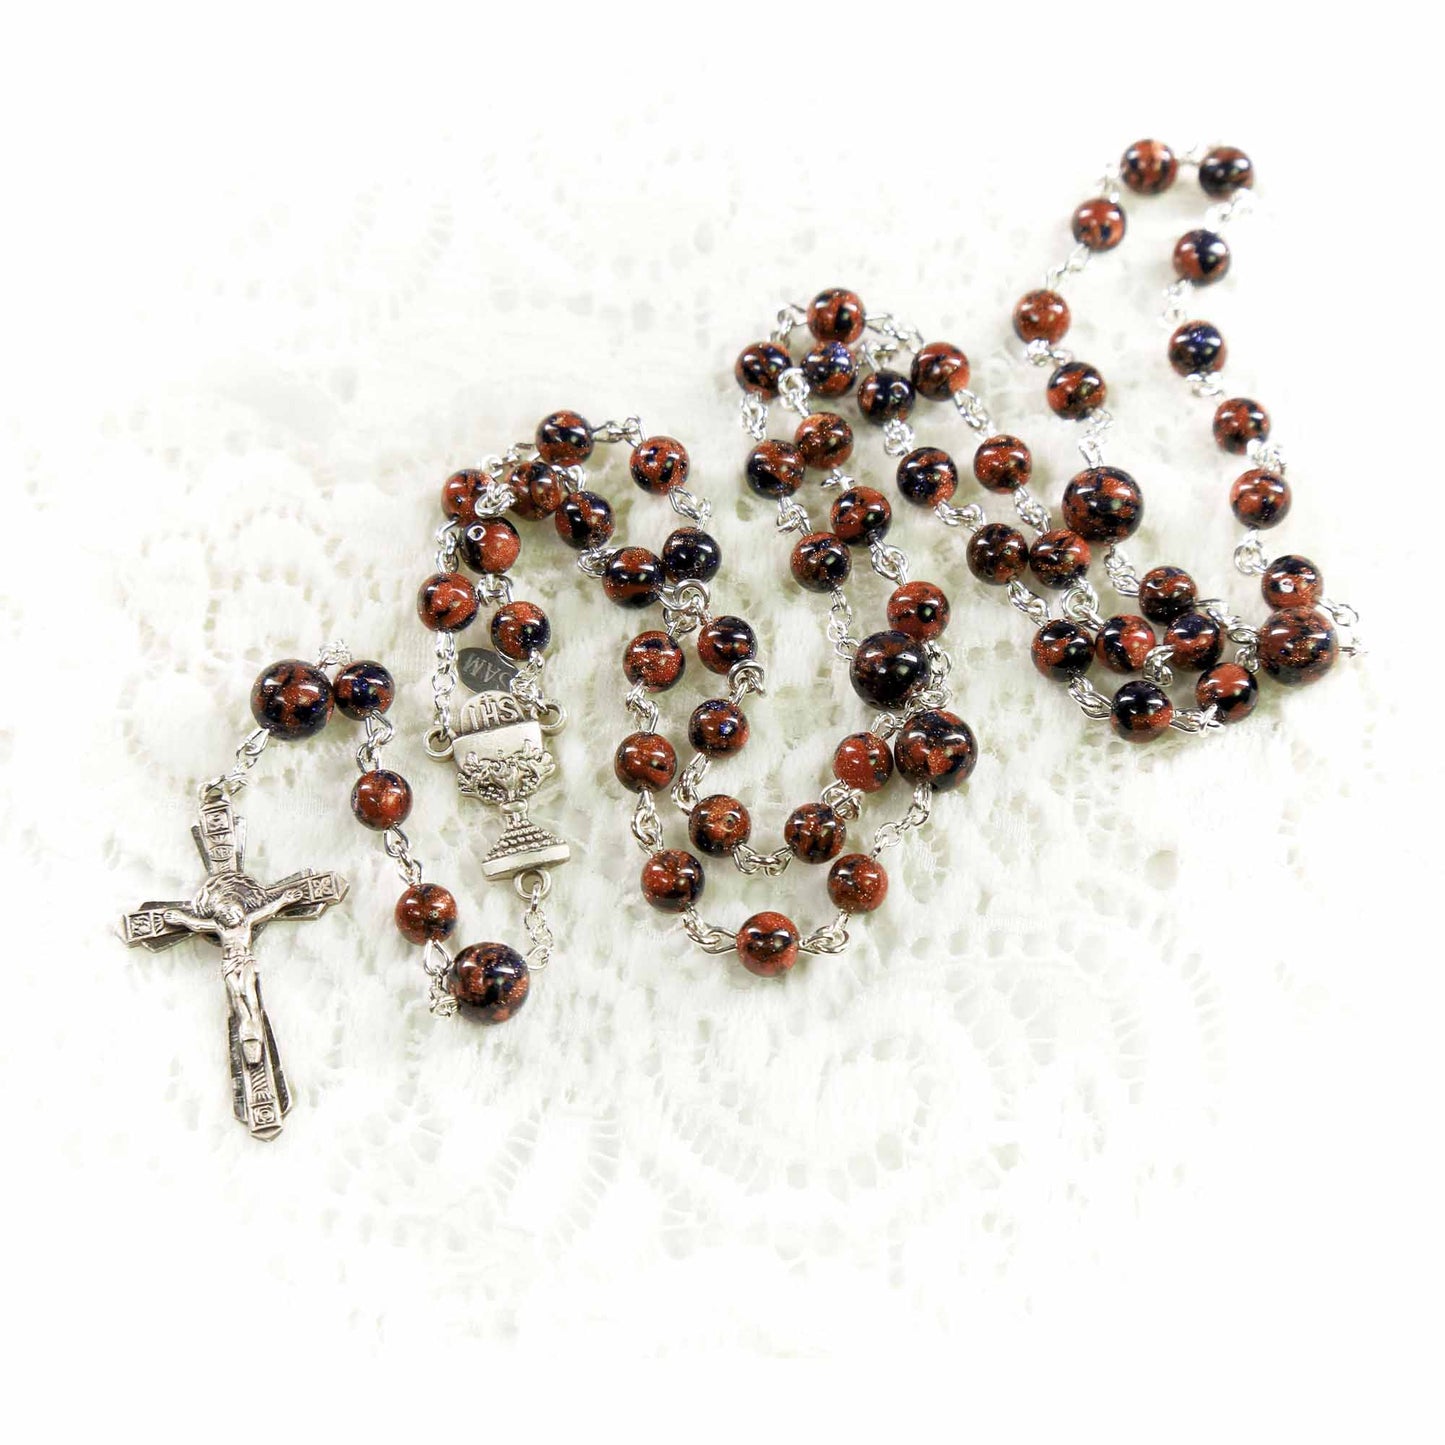 First Communion Blue and Brown Sandstone Rosary